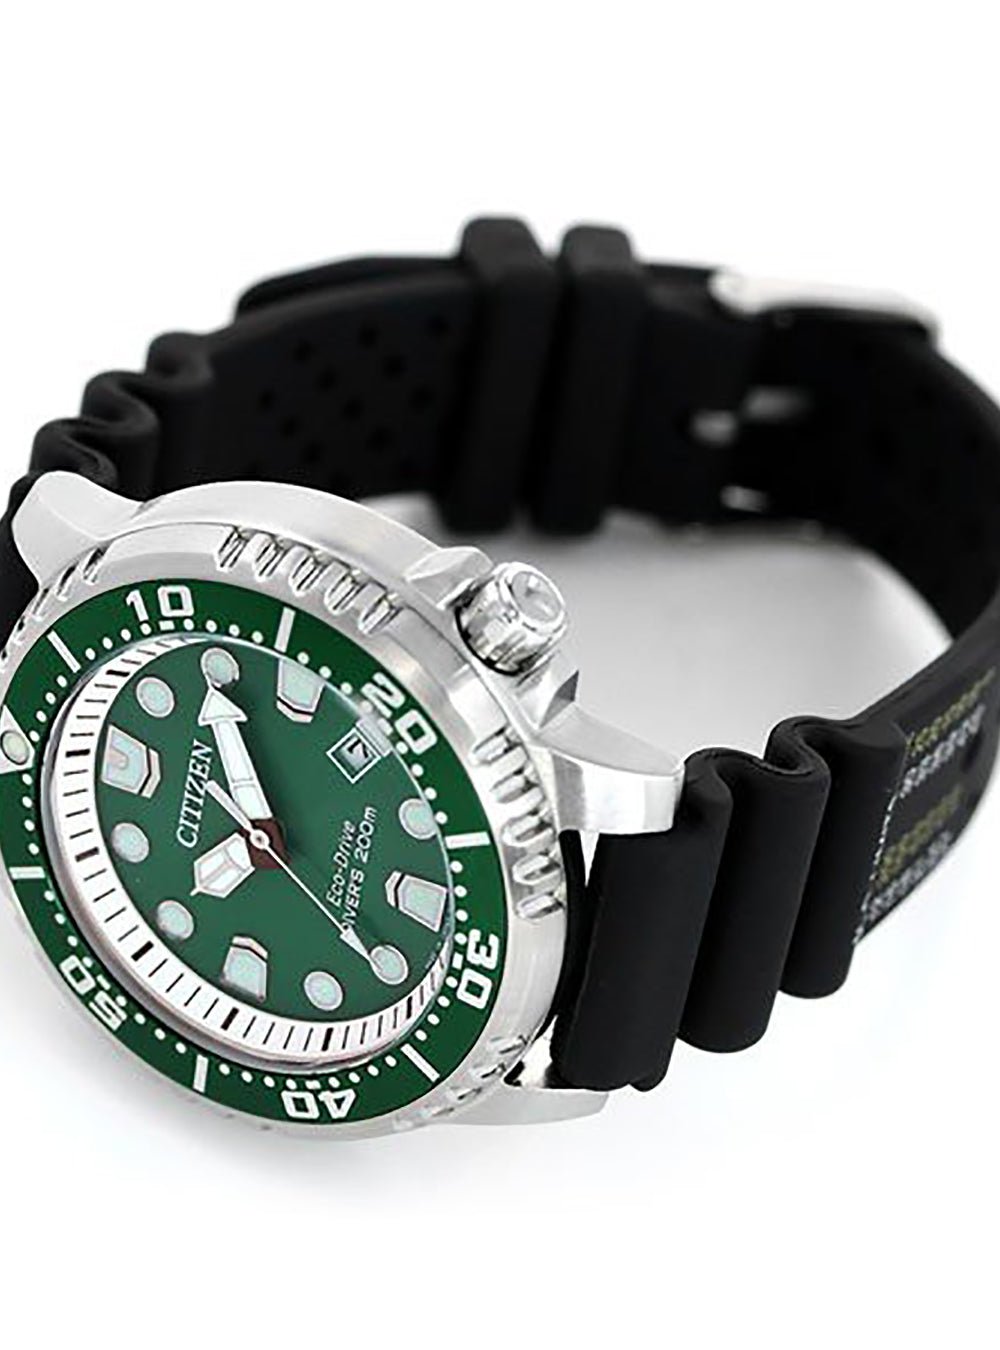 CITIZEN PROMASTER ECO-DRIVE DIVER'S BN0156-13W MADE IN JAPAN JDMWRISTWATCHjapan-select